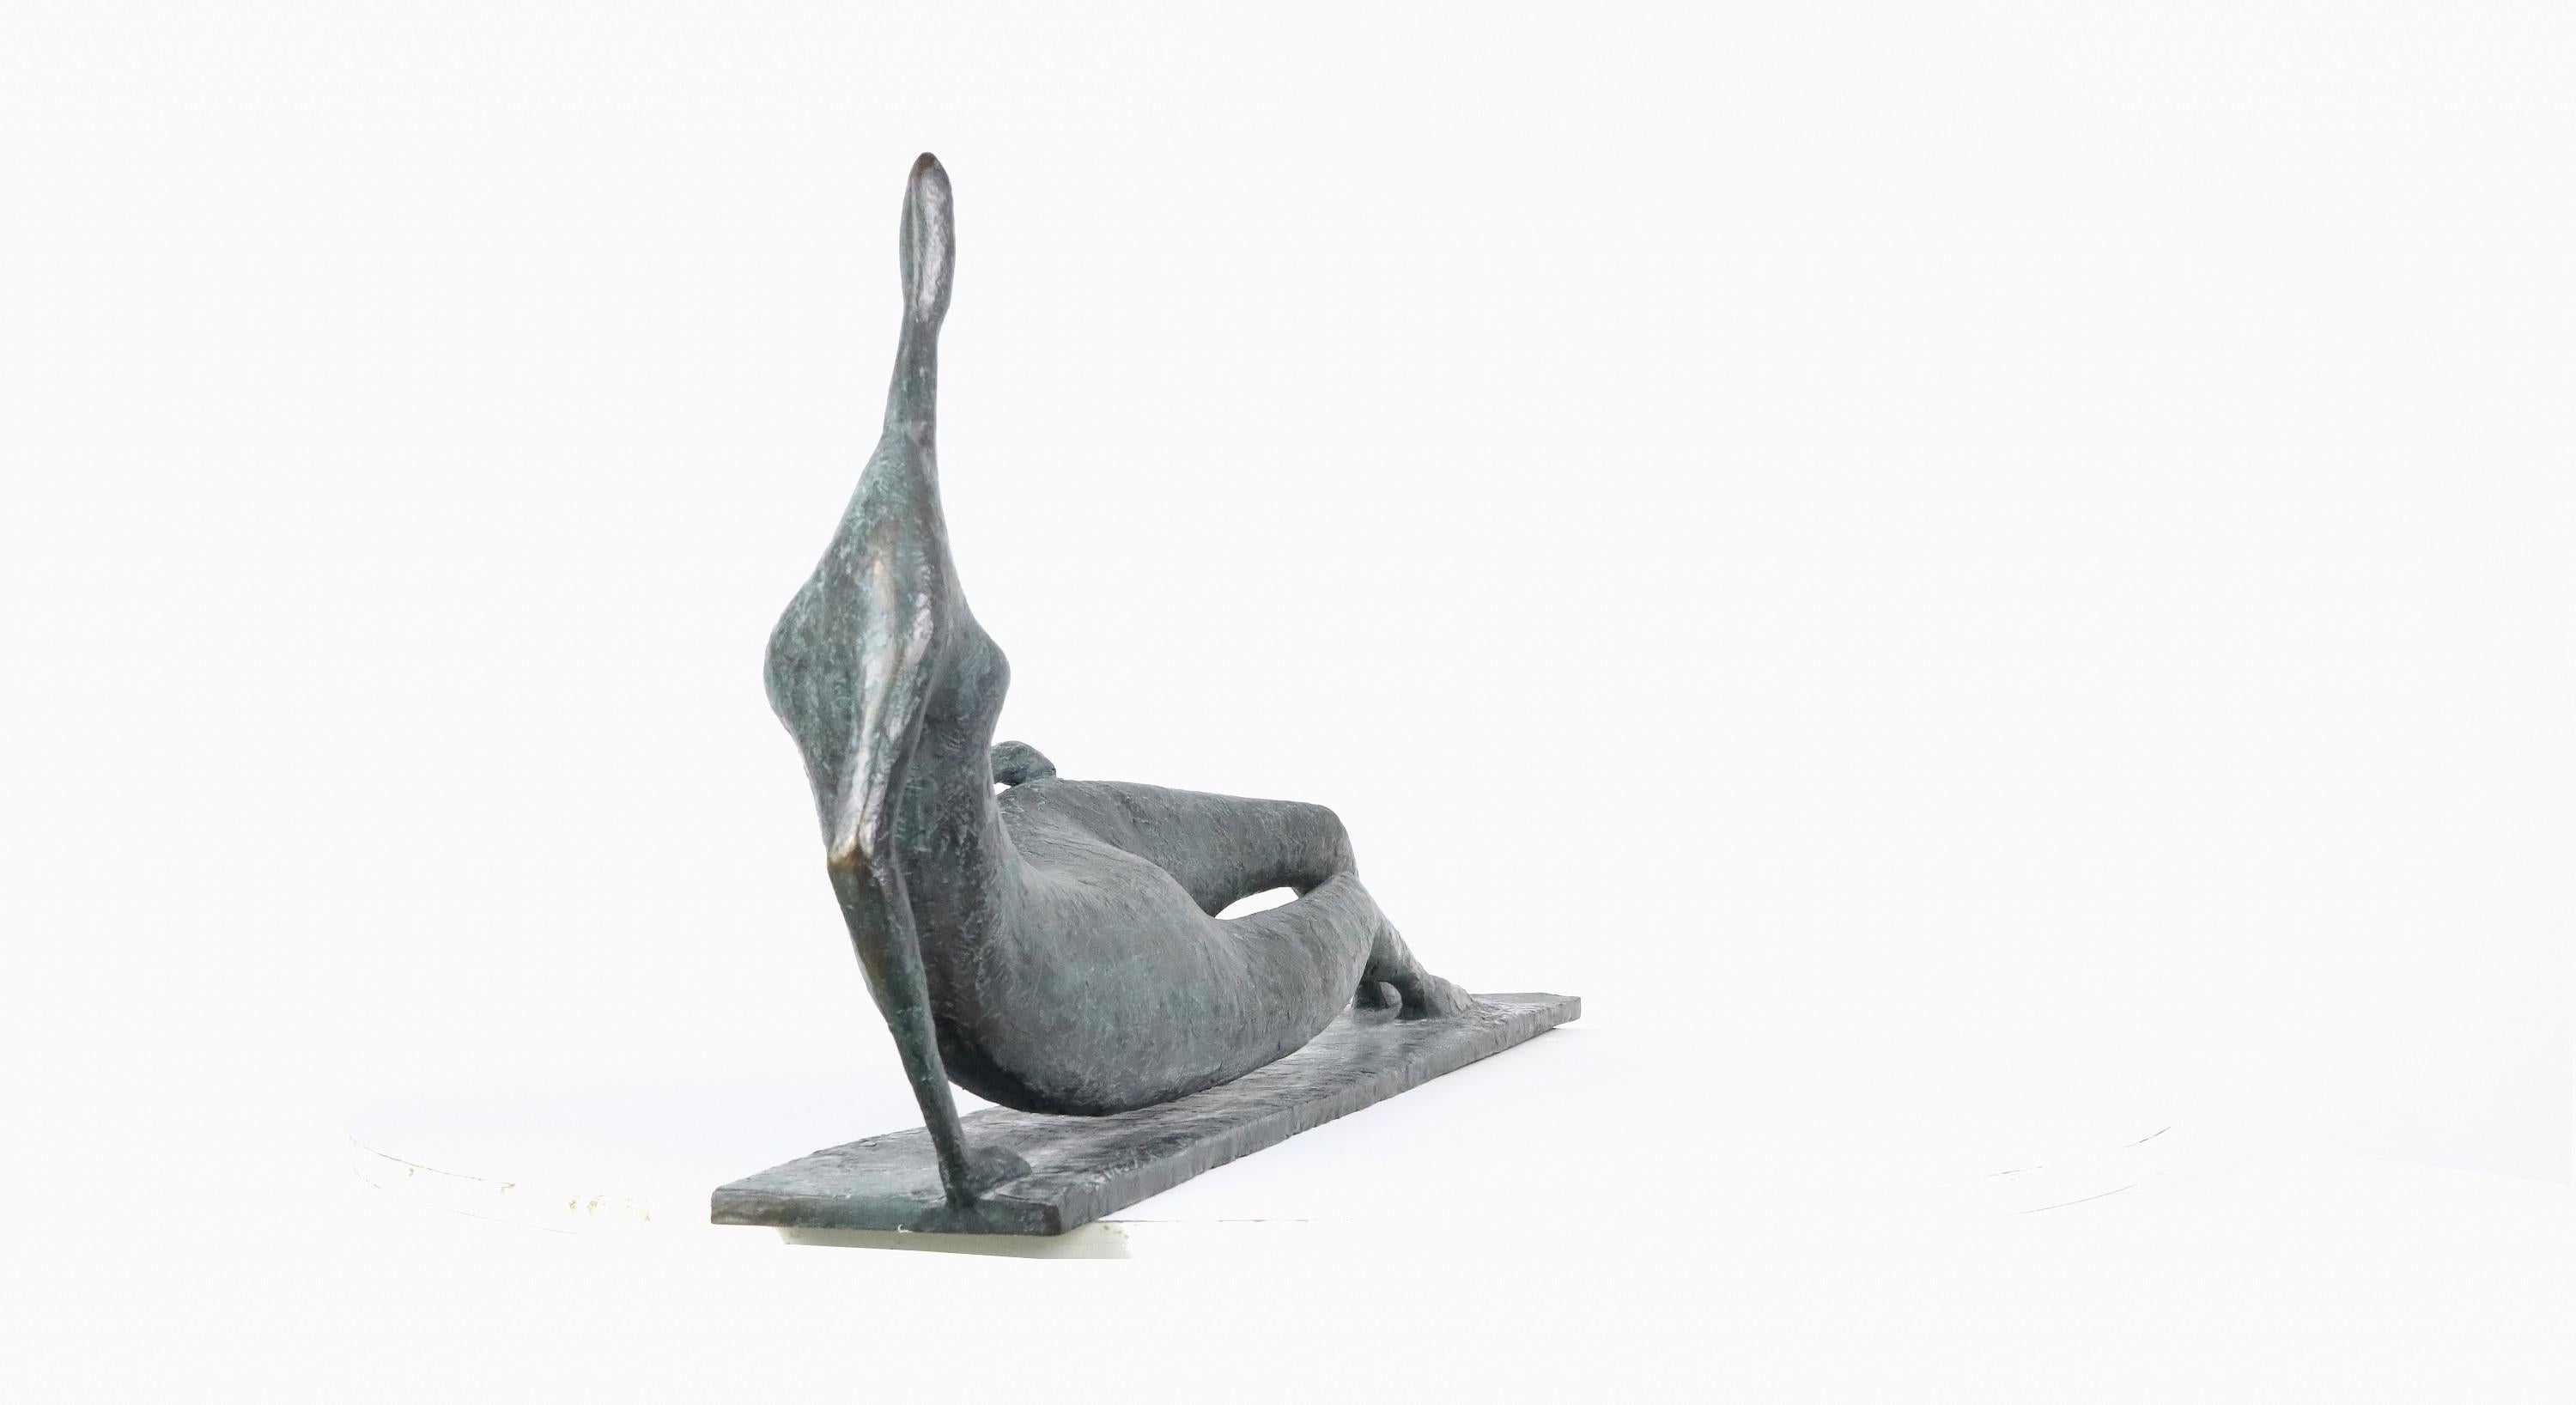 Large Lying Figure I is a sculpture by French contemporary artist Pierre Yermia. 
Bronze, 46 cm × 120 cm × 17 cm.  Edition of 8 copies and 4 artist's proofs. Each cast is signed and numbered.
This elongated figure to all appearances resting is